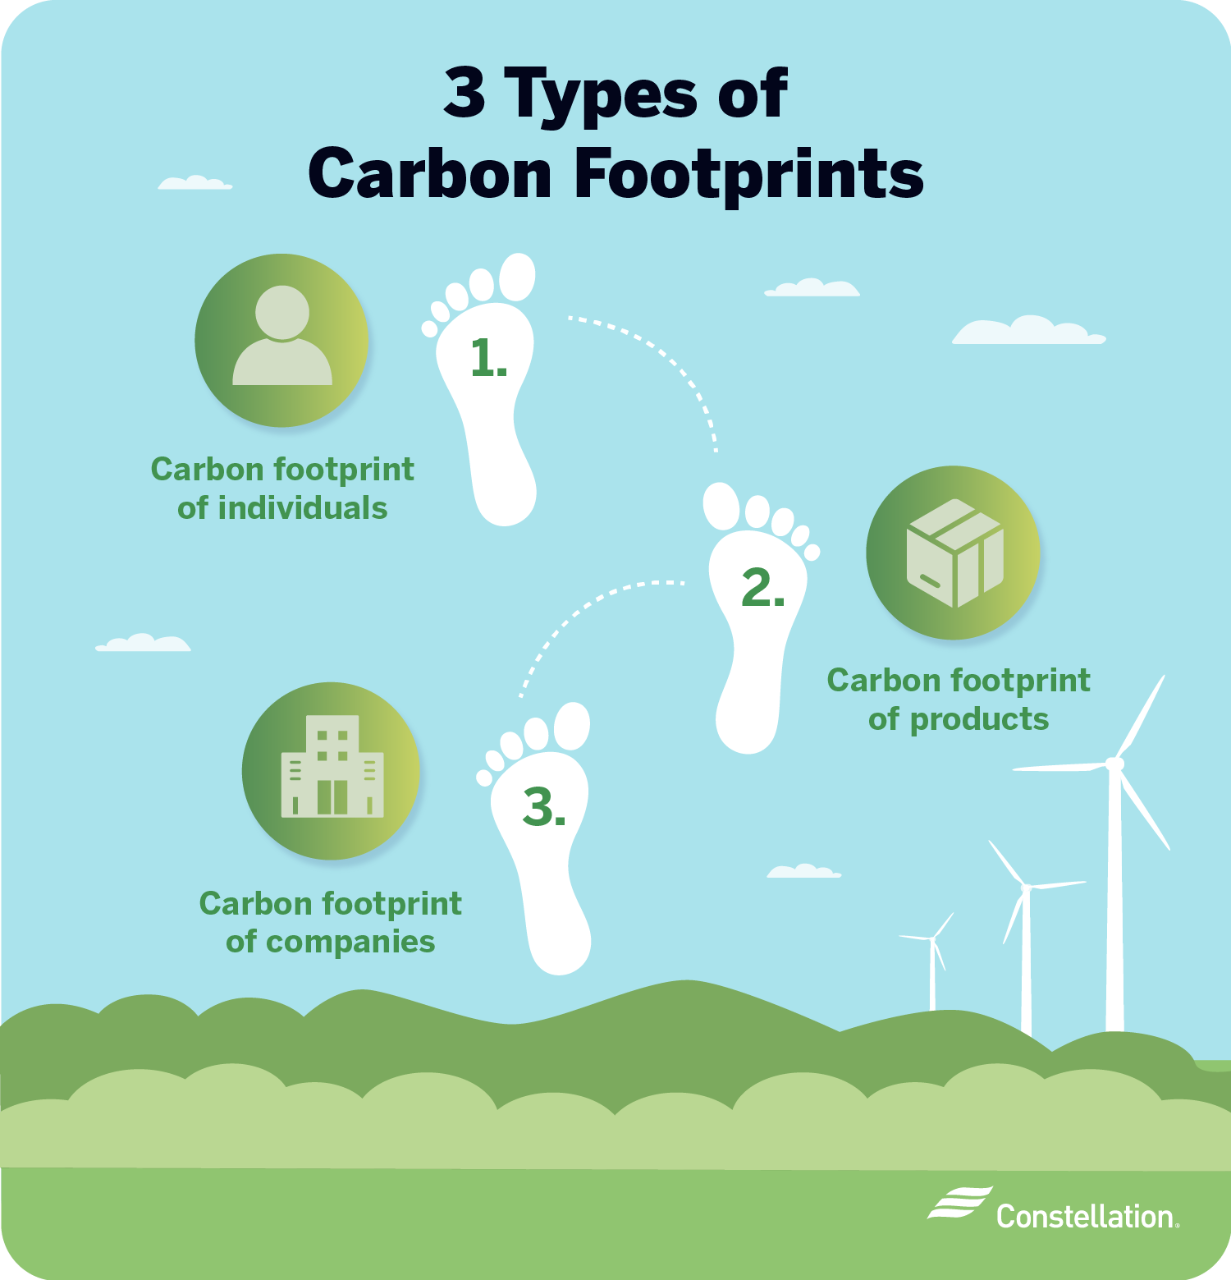 How Big Is Your Carbon Footprint?